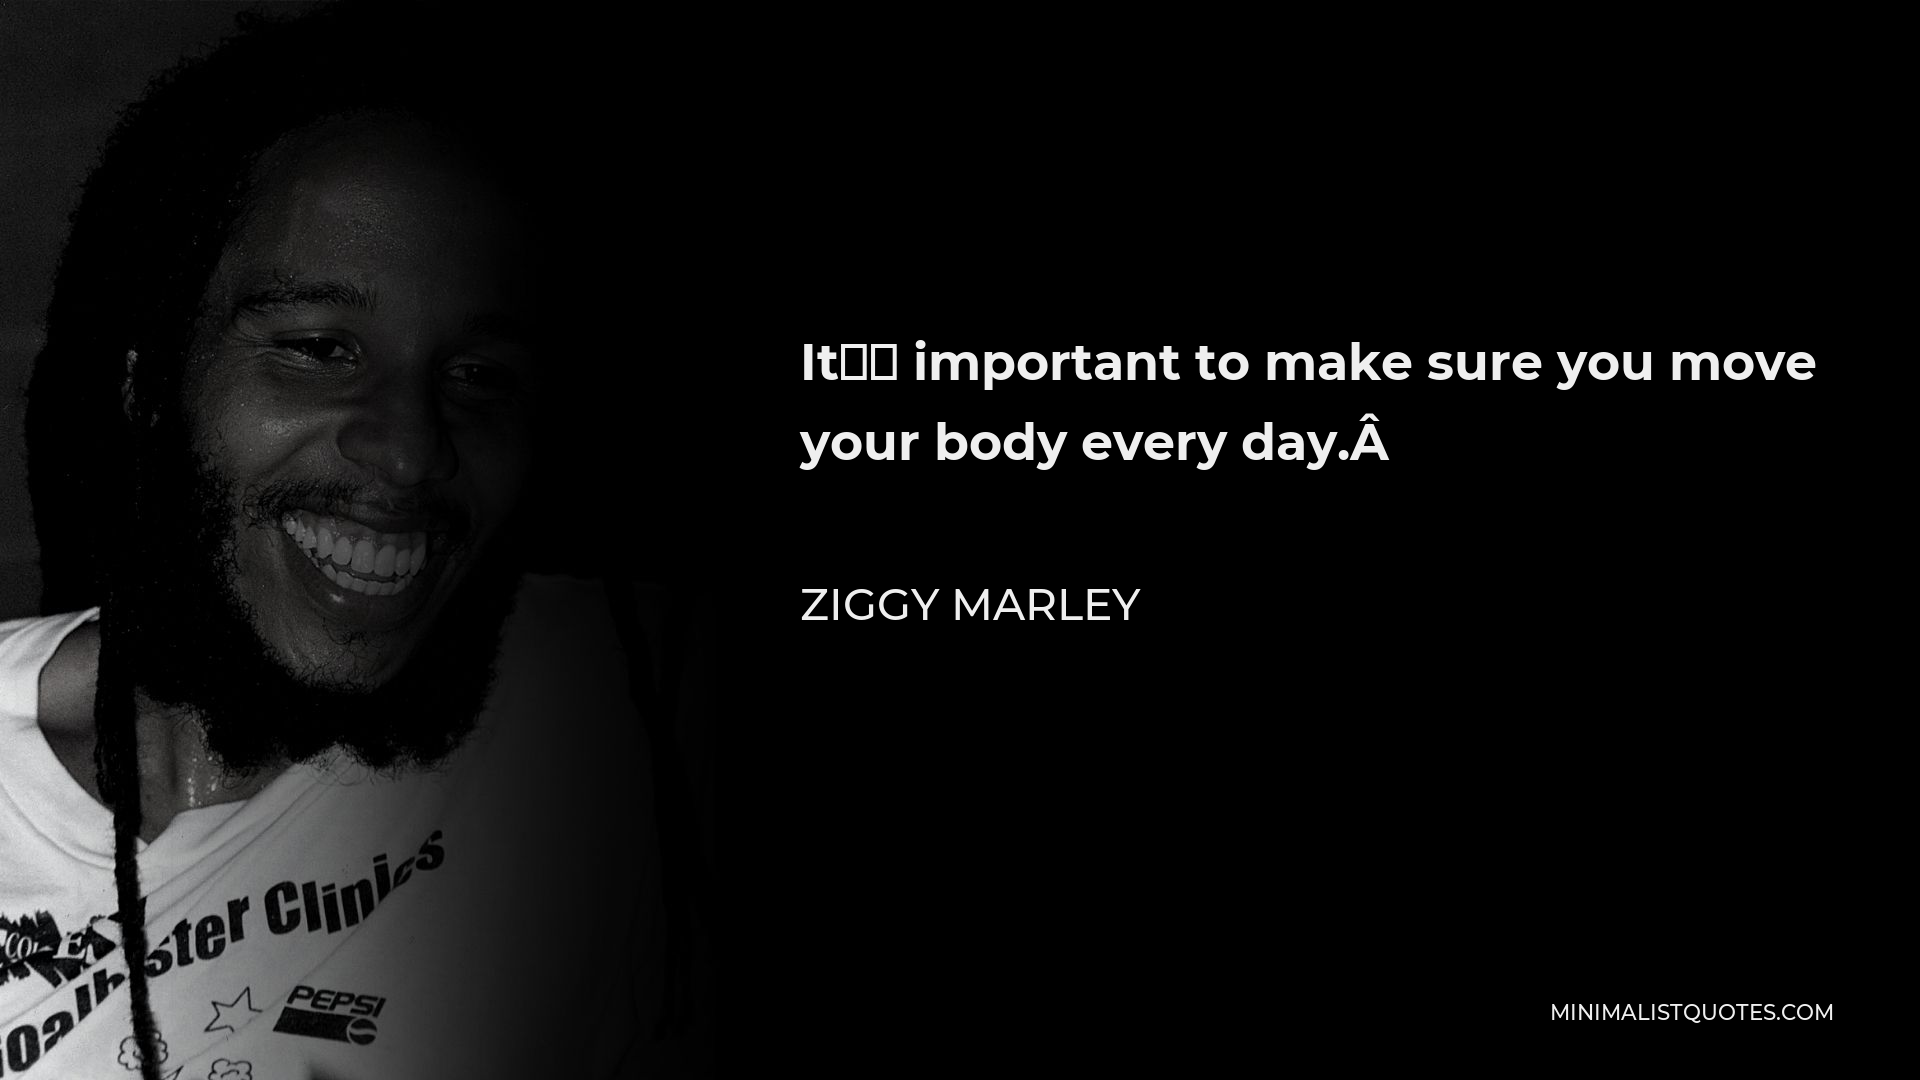 Ziggy Marley Quote - It’s important to make sure you move your body every day. 